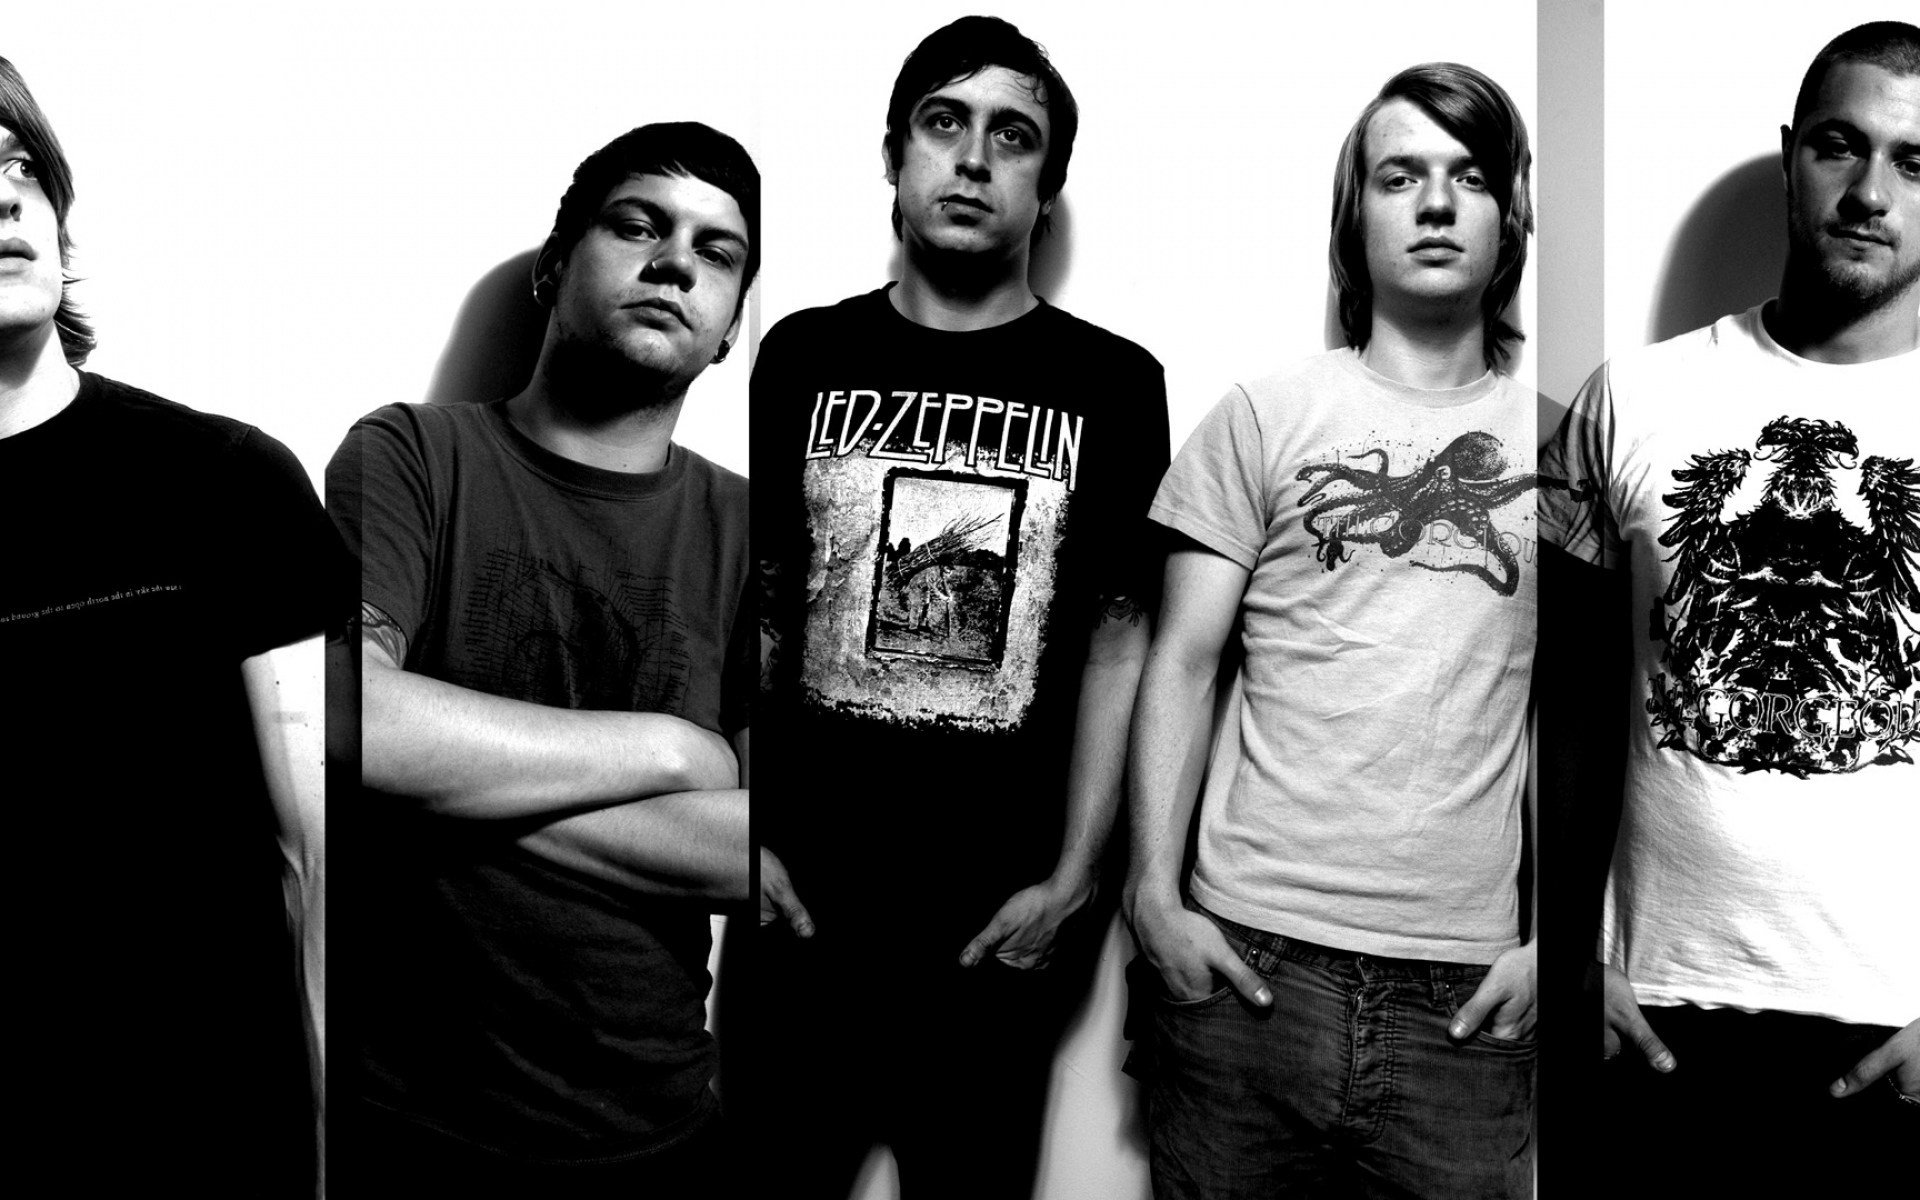 Обои на band 6. Misery Signals. Misery Signals Band. Misery Signals футболка. Misery Signals Controller.